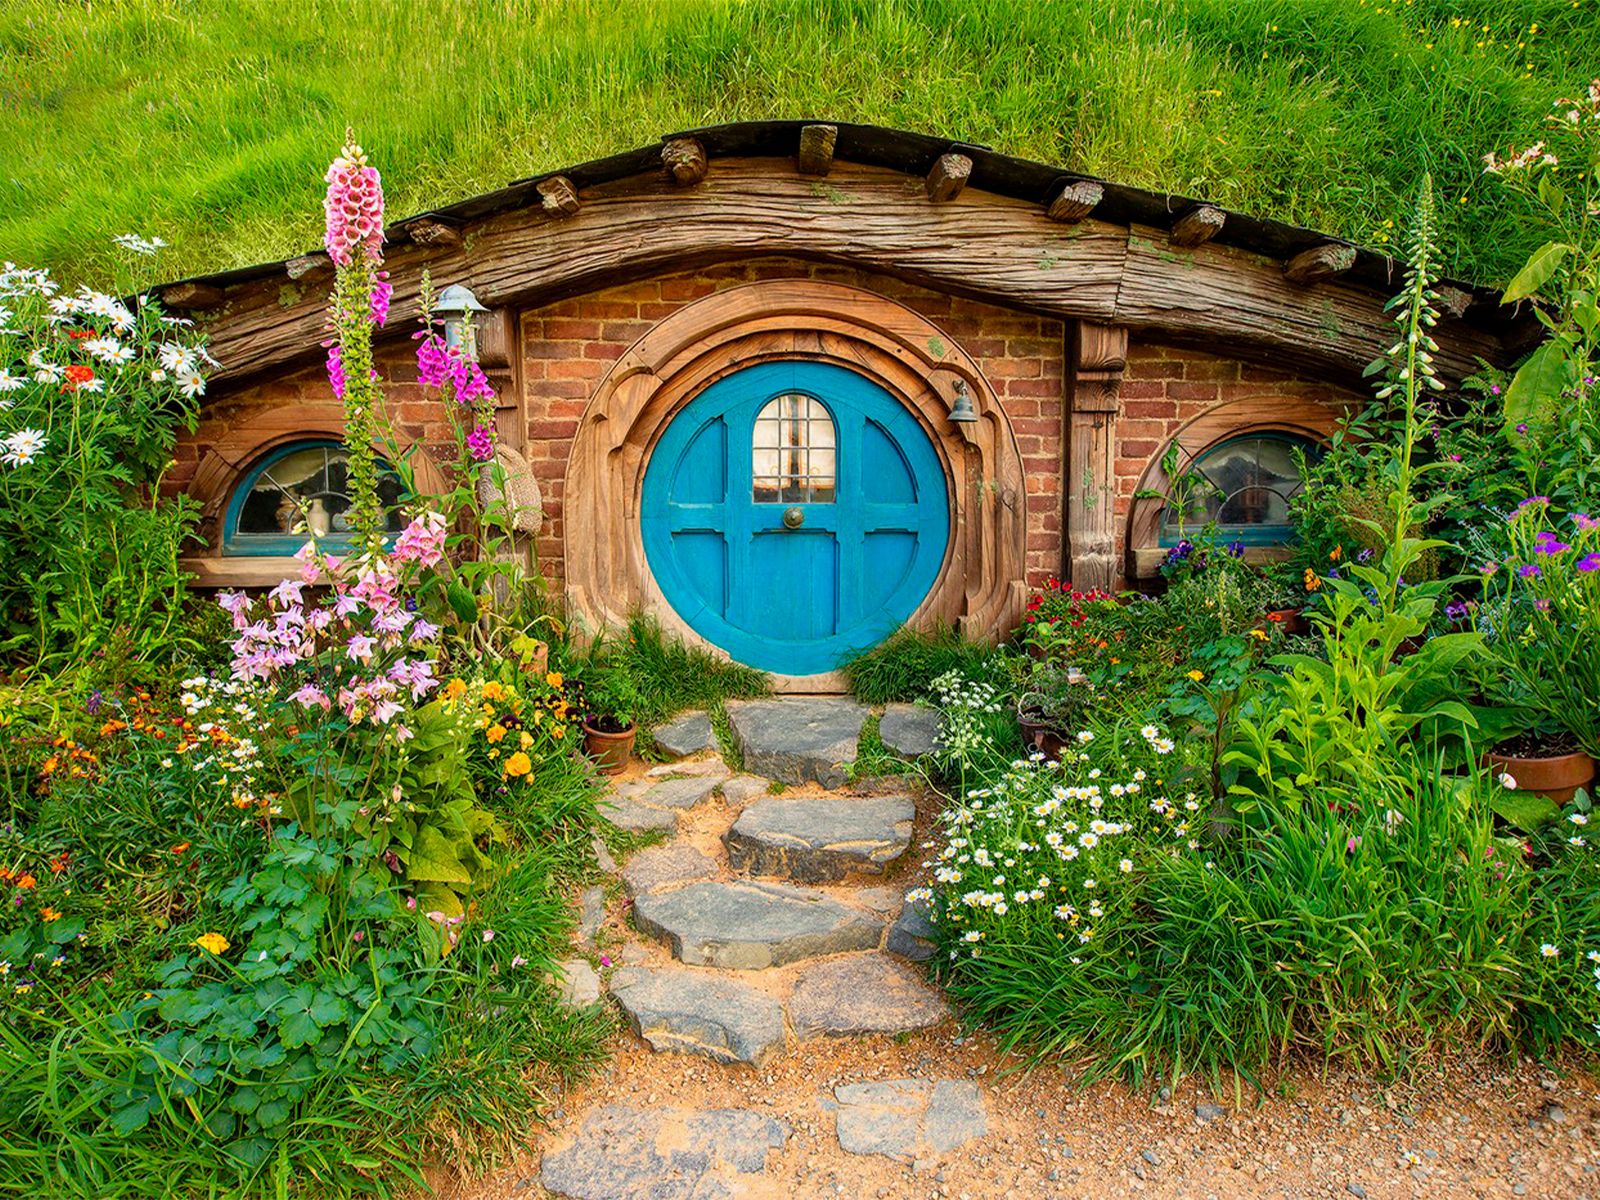 Airbnb celebrates the 10th anniversary of The Hobbit with special accommodation